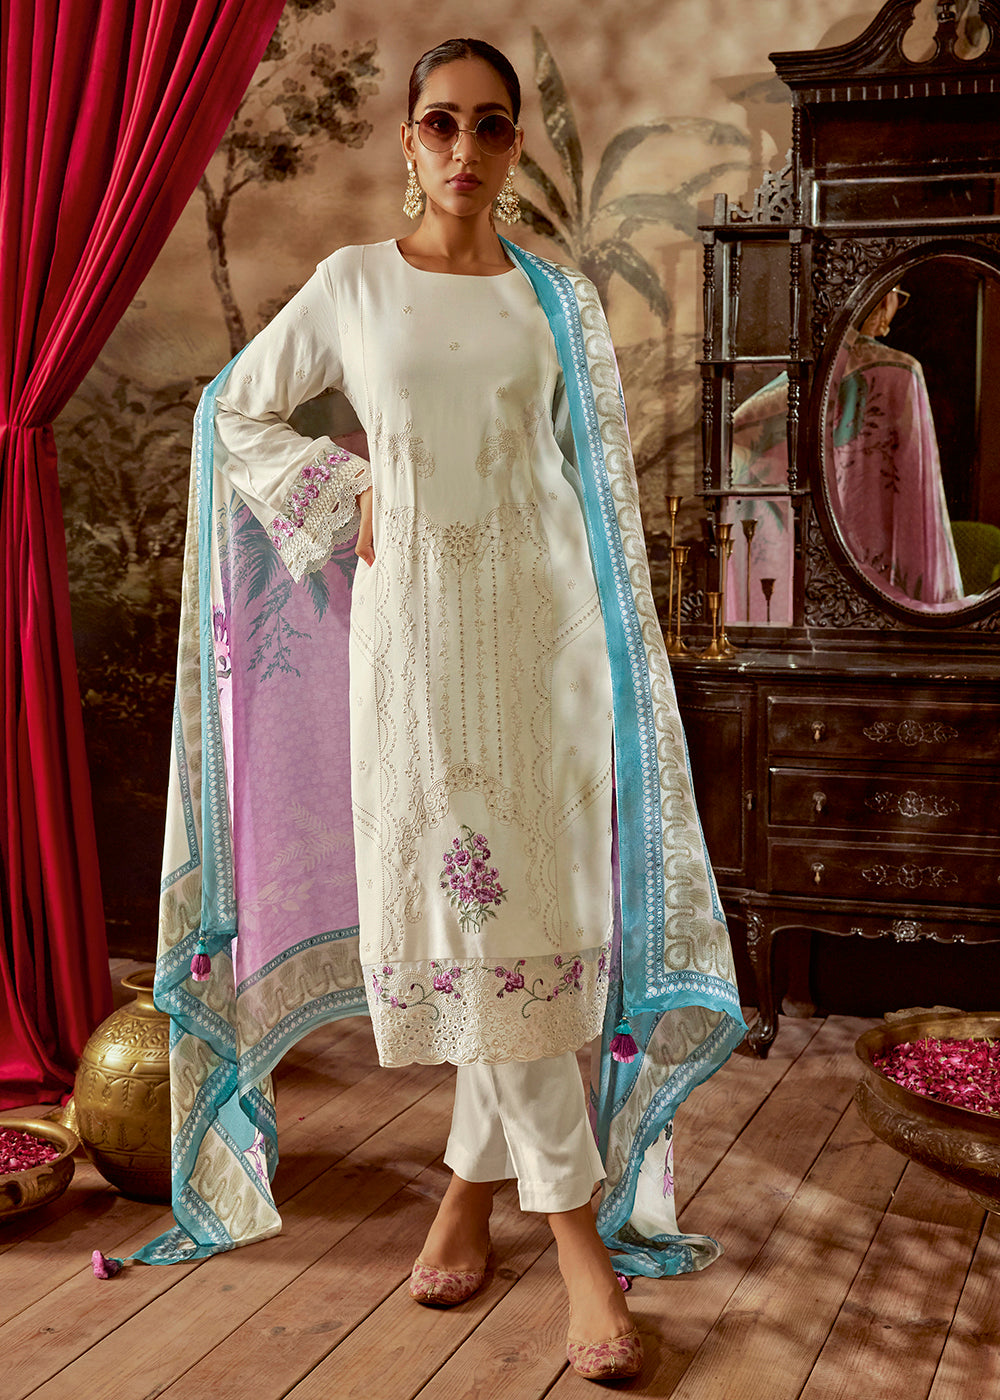 Buy Now Charming White Parsi Style Embroidered Festive Salwar Suit Online in USA, UK, Canada, Germany, Australia & Worldwide at Empress Clothing. 